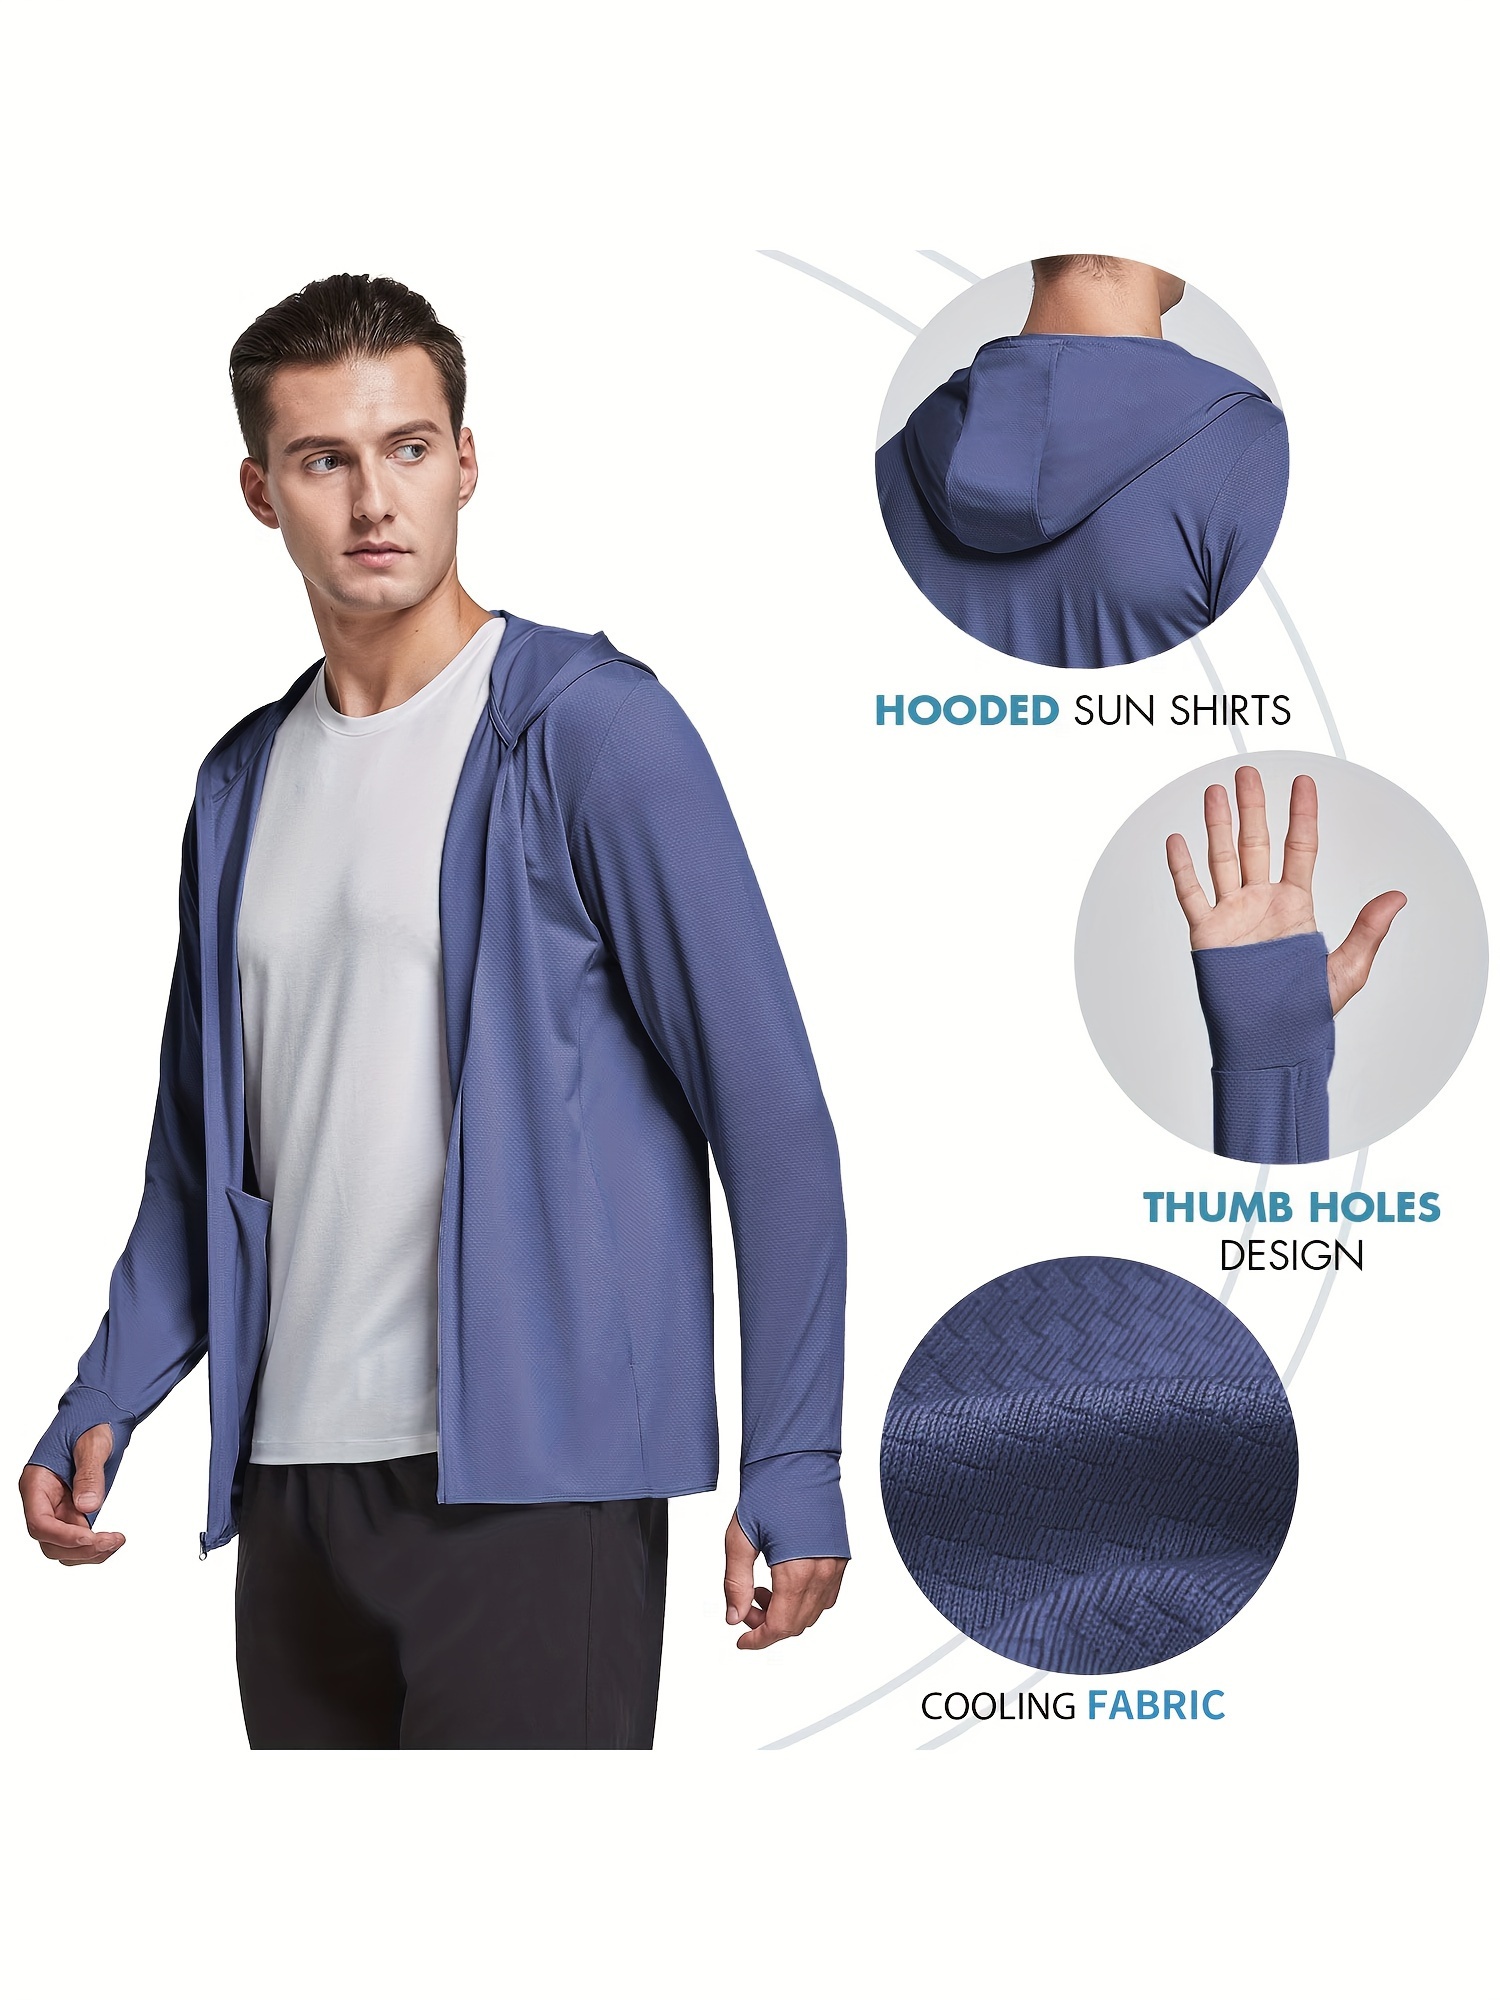 Men's Sun Protection Hooded Jacket - UPF 50+ UV Shirt With Long Sleeves,  Quick Dry Fabric For Fishing, Hiking, And Workouts